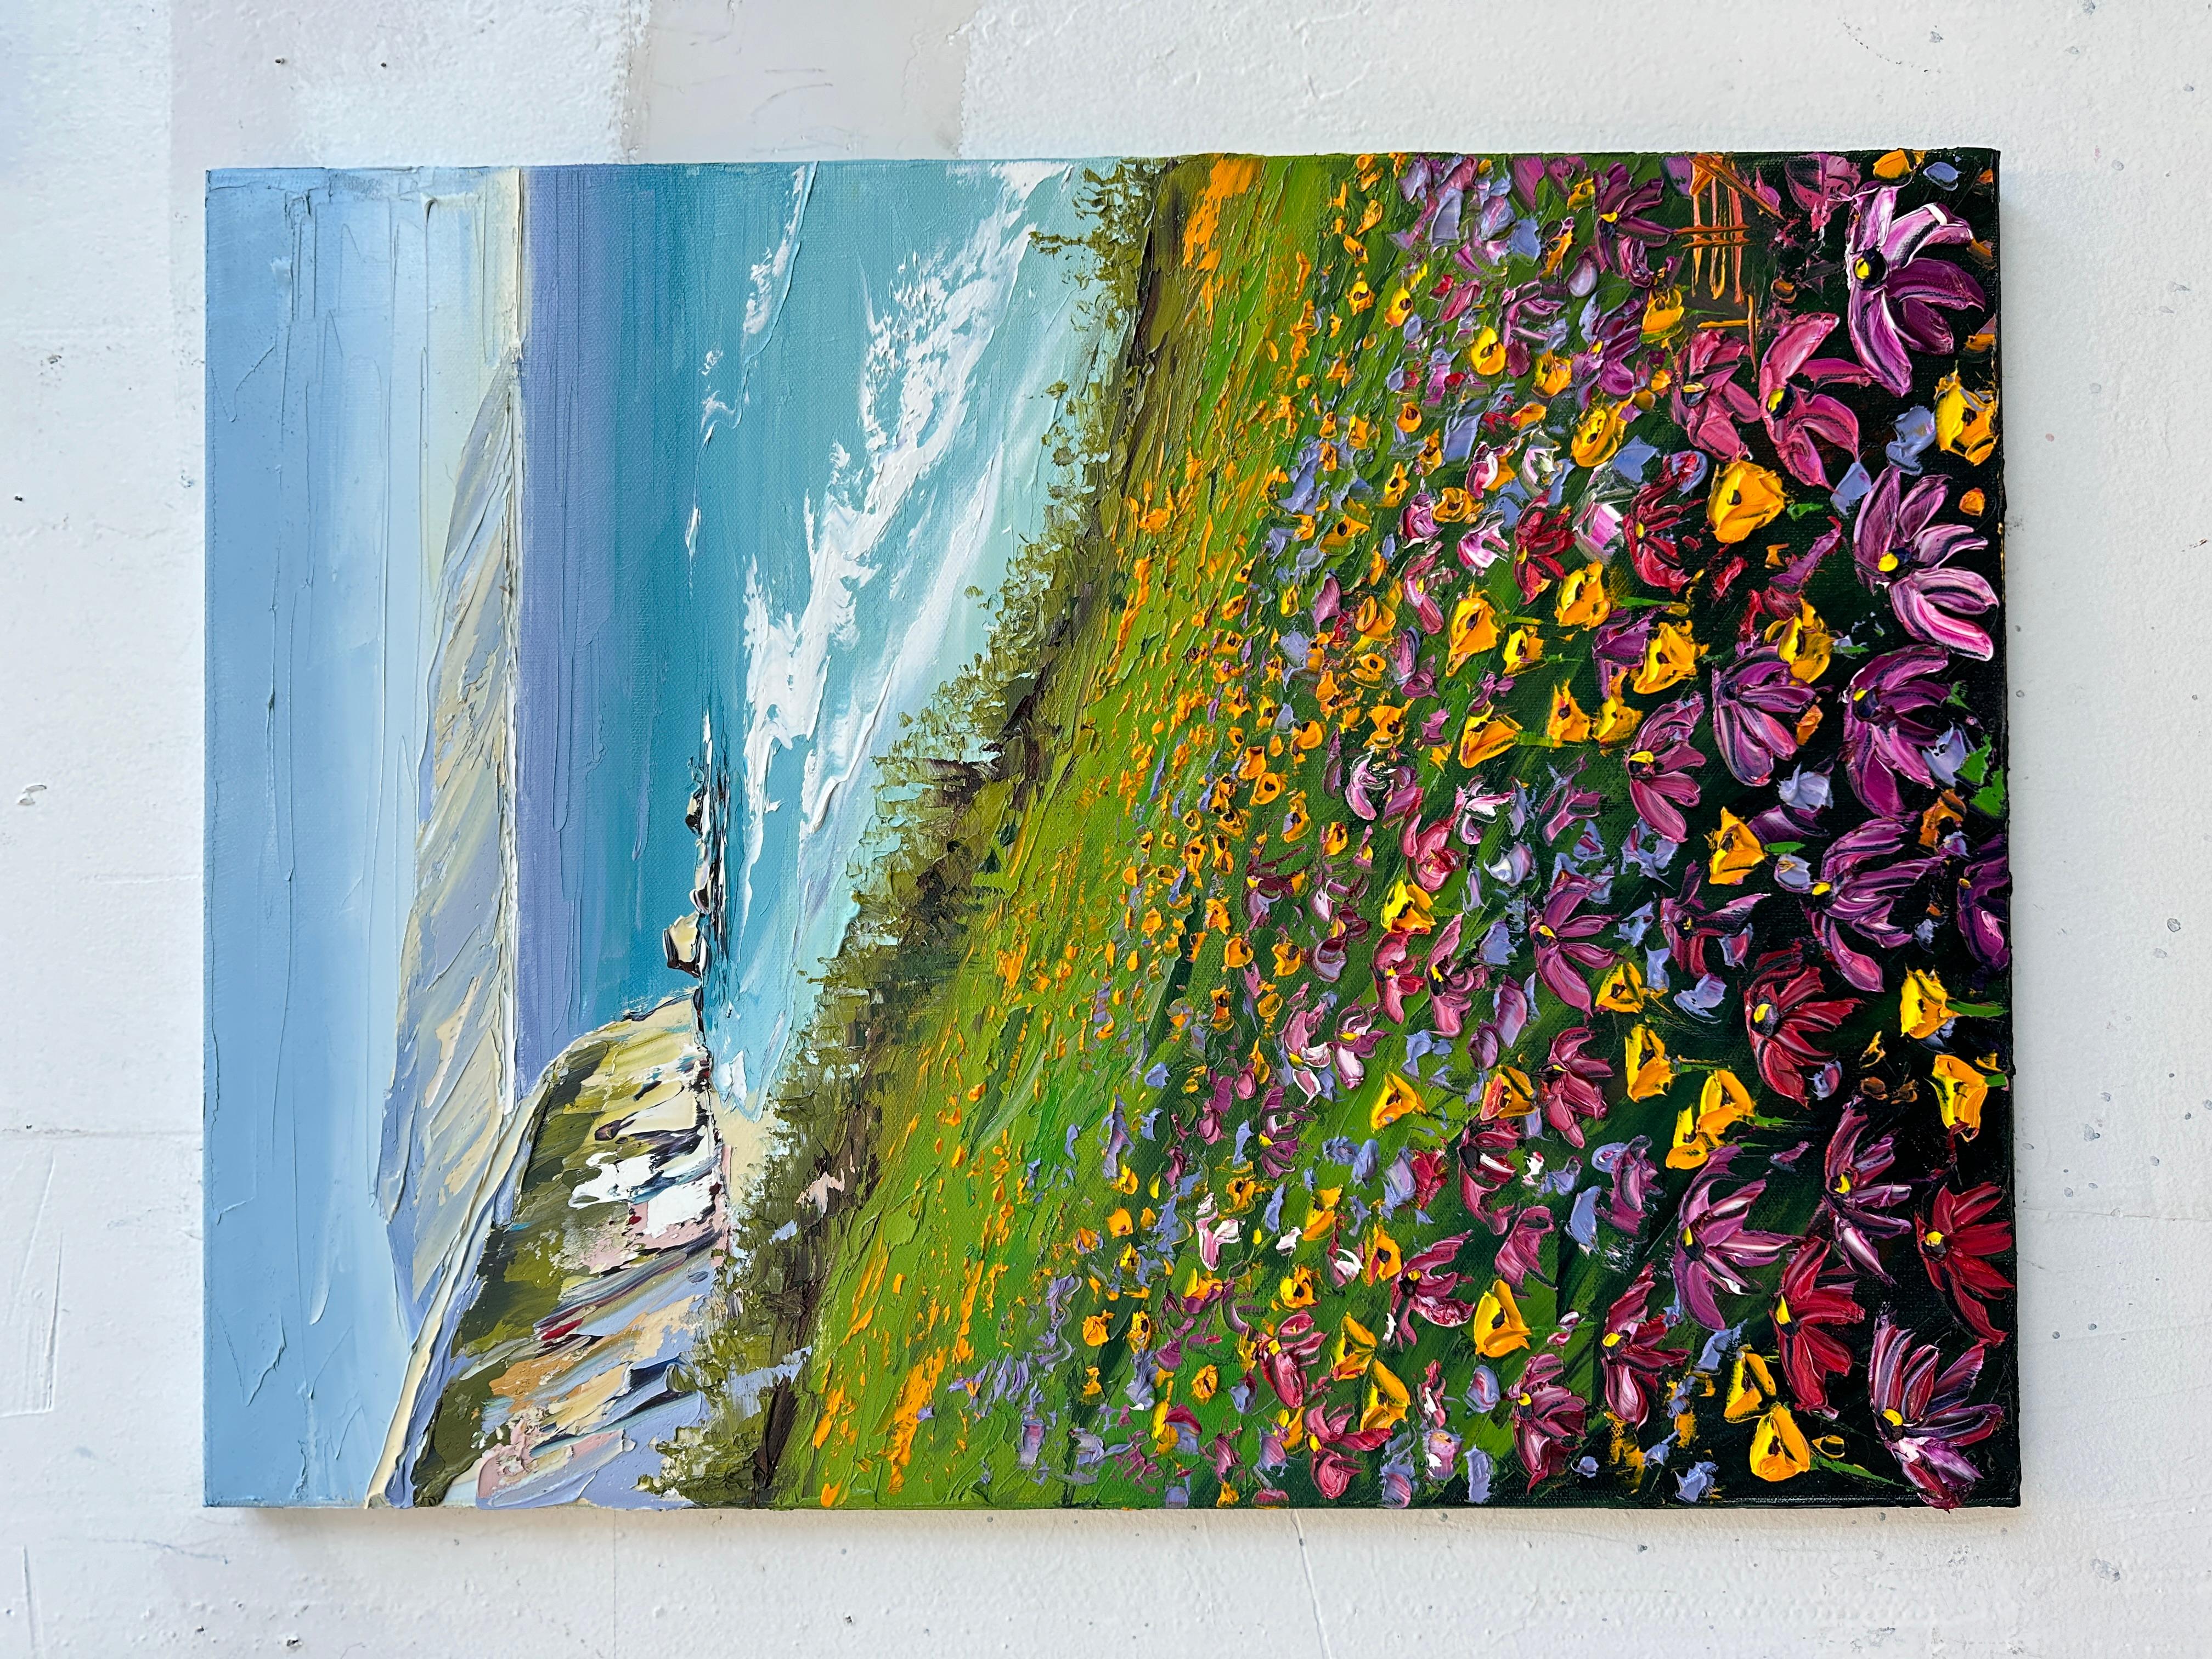 <p>Artist Comments<br>The artwork portrays the Big Sur region with a southward view of the California Coast and Los Angeles. Lush hills transition into ocher cliffs filled with poppies before meeting the Pacific Ocean. The impasto technique gives a